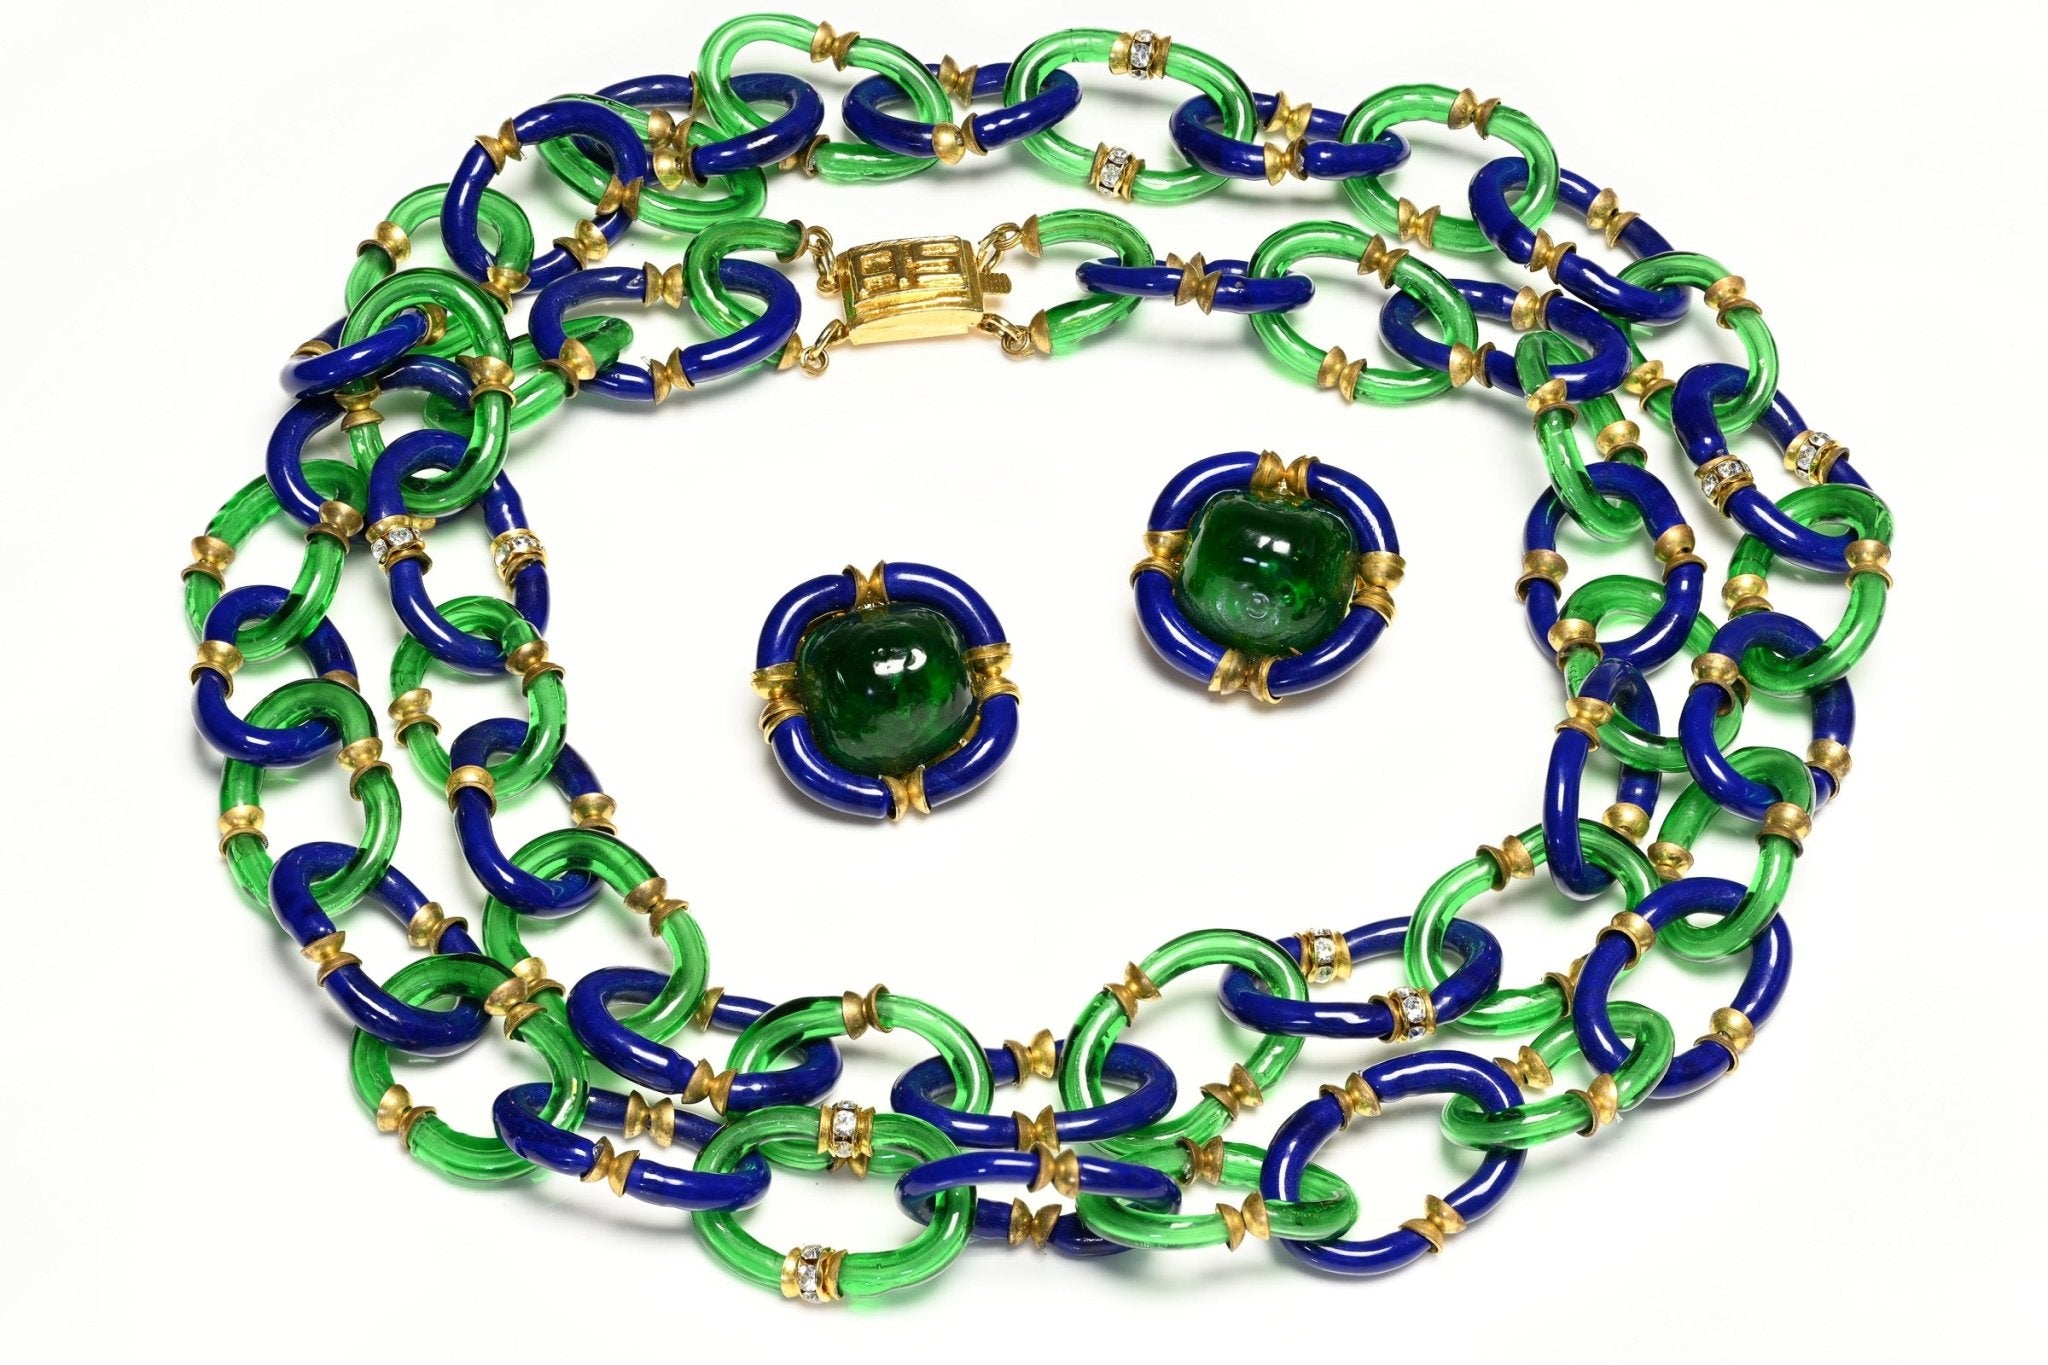 Vintage 1960's Archimede Seguso Green Blue Glass Chain Link Necklace Earrings Set